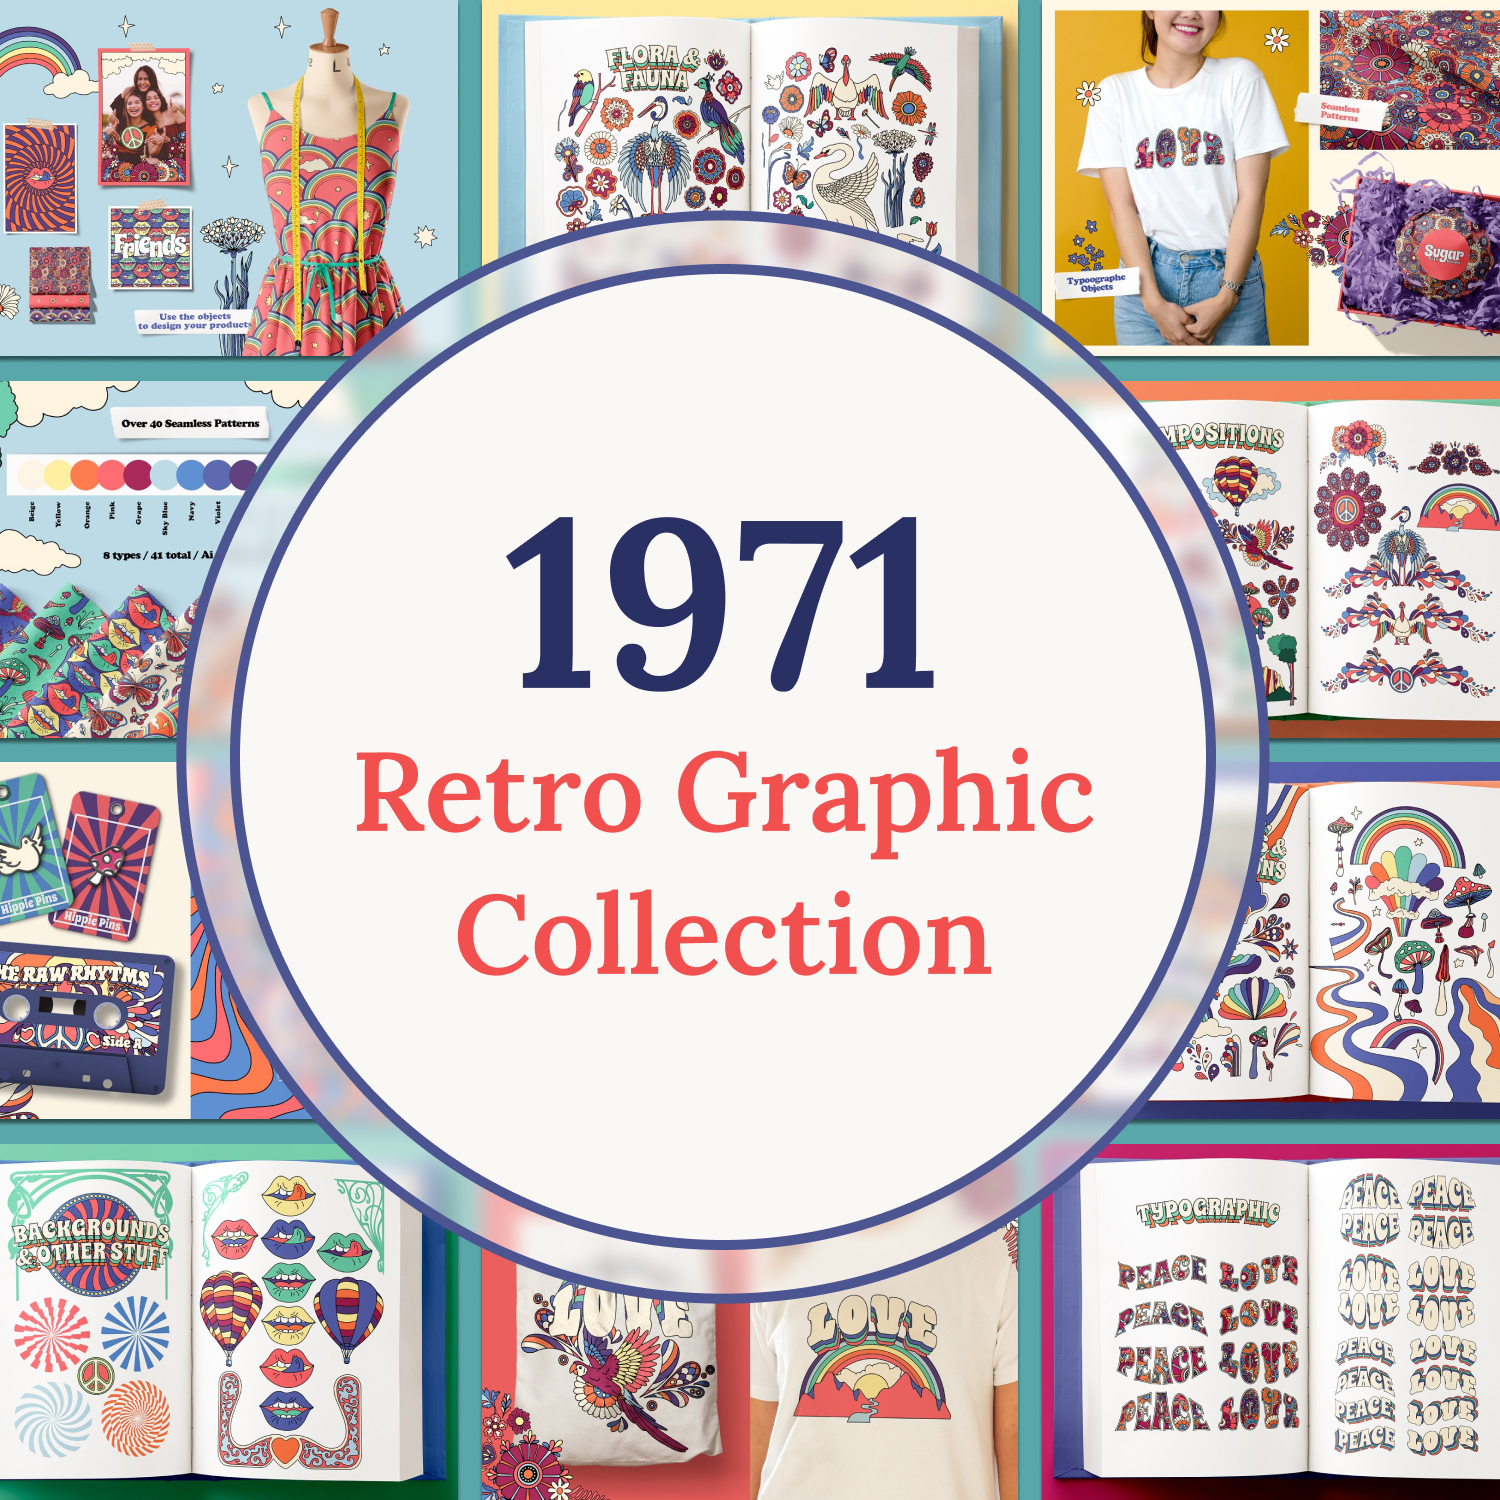 Prints of retro graphic collection.